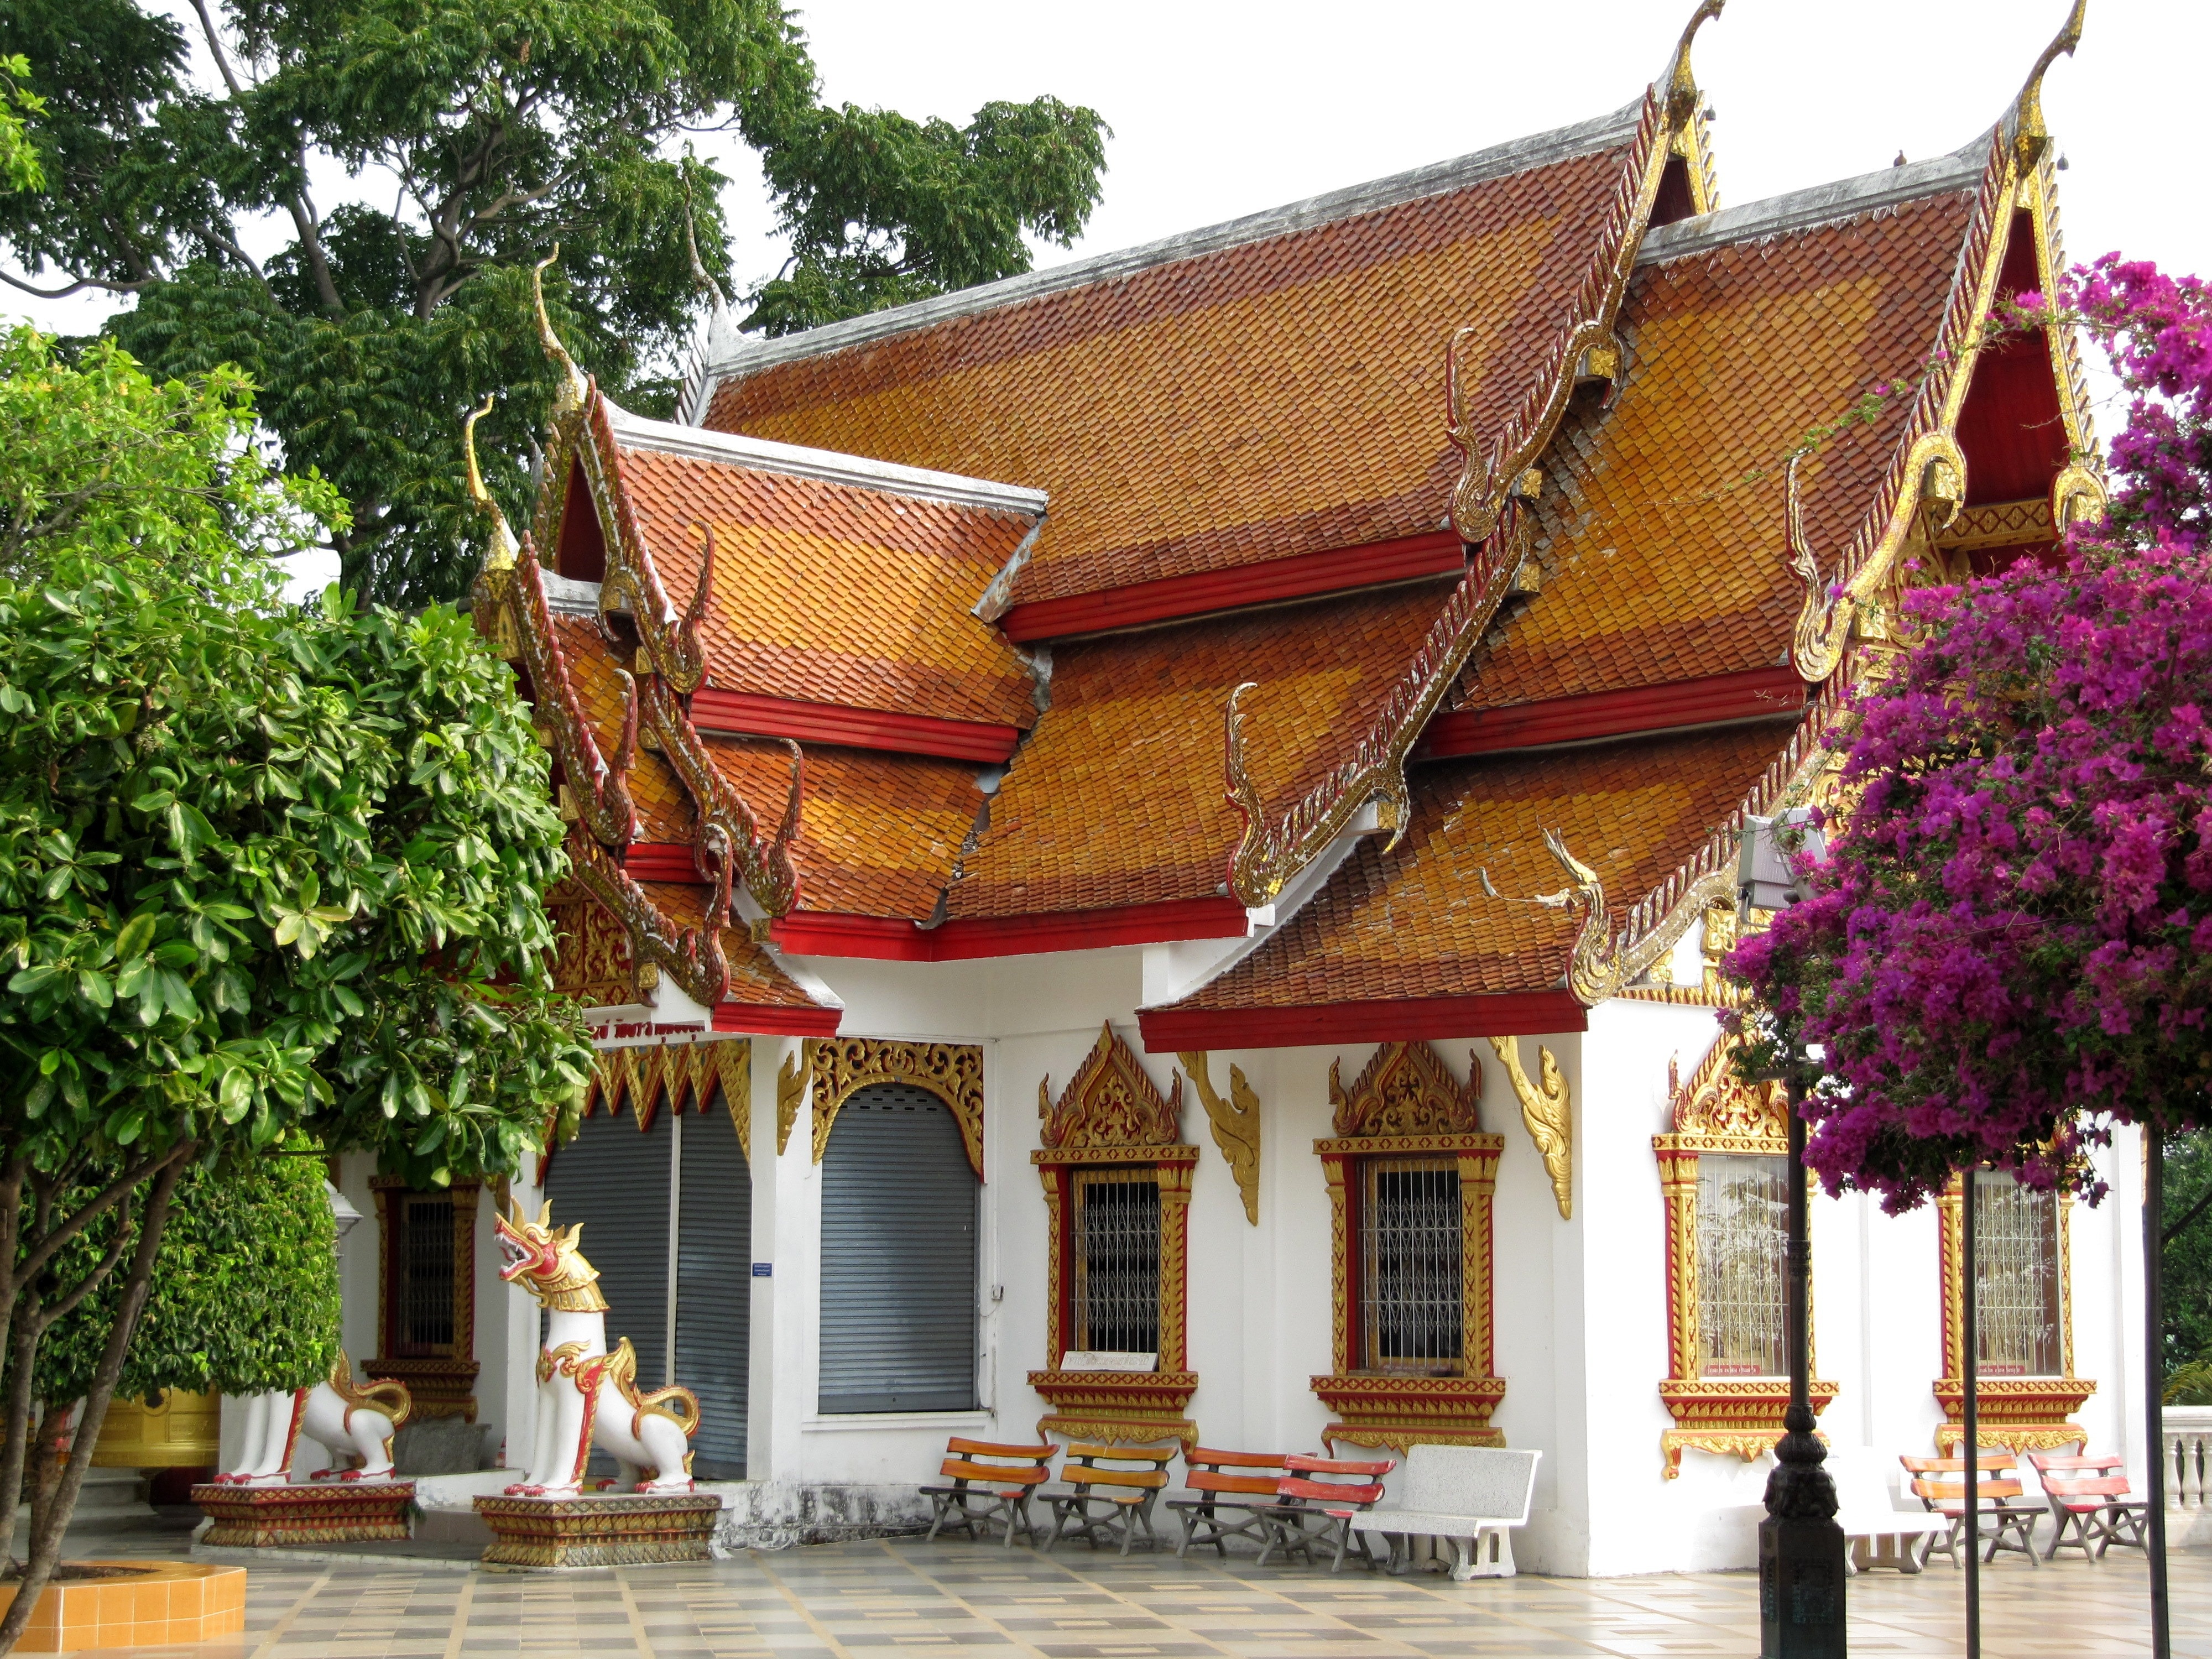 white, brown and red temple near trees at daytime